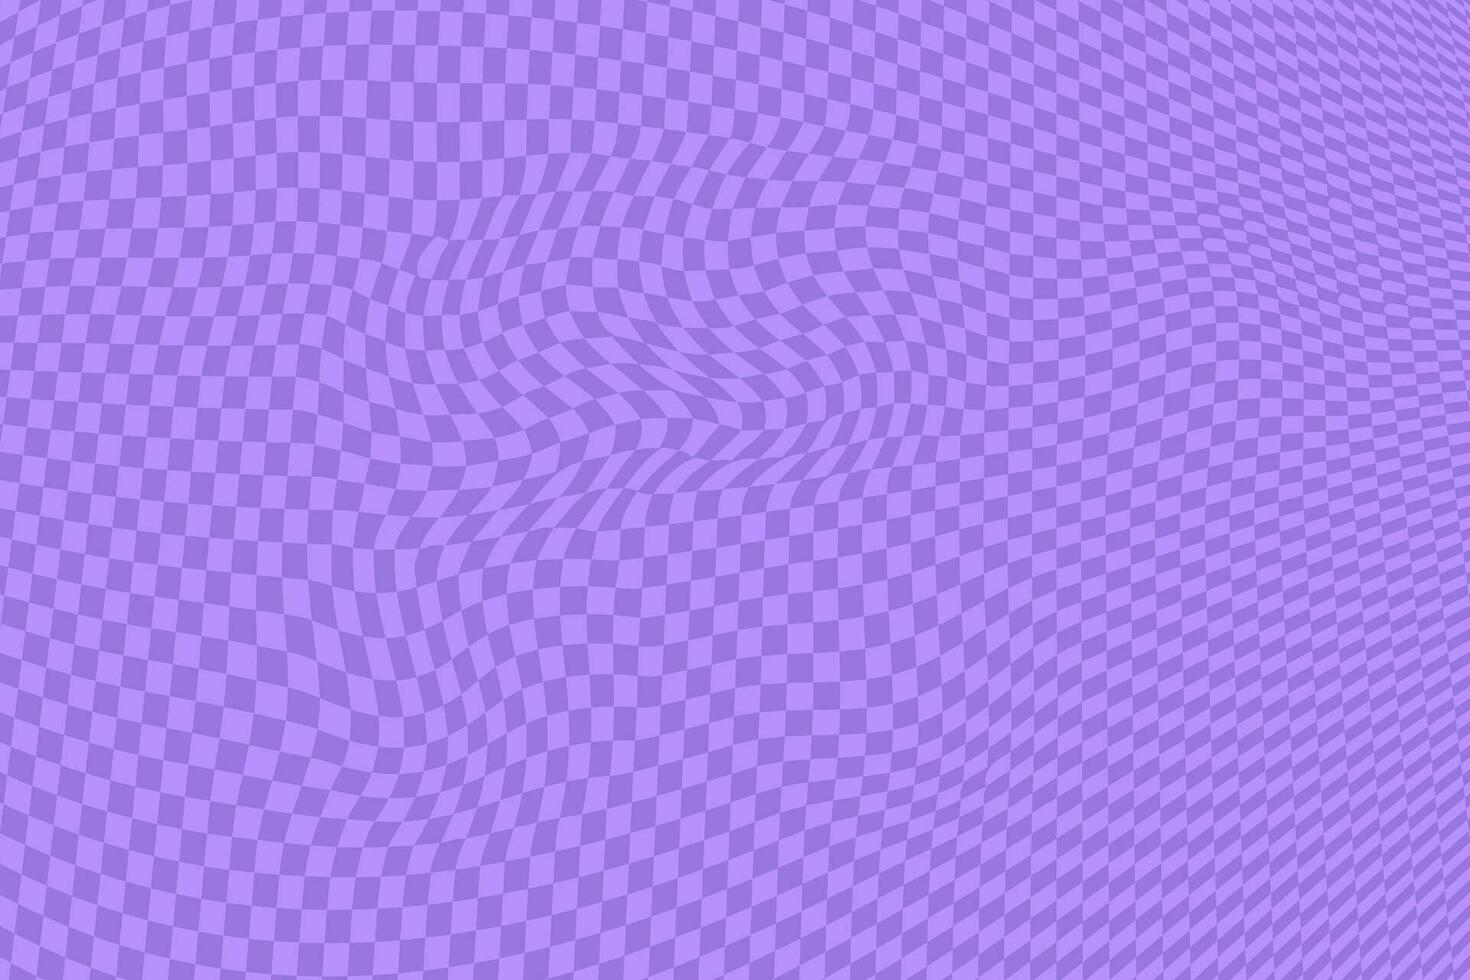 Purple retro psychedelic checkerboard pattern. Groovy funky textures. vector